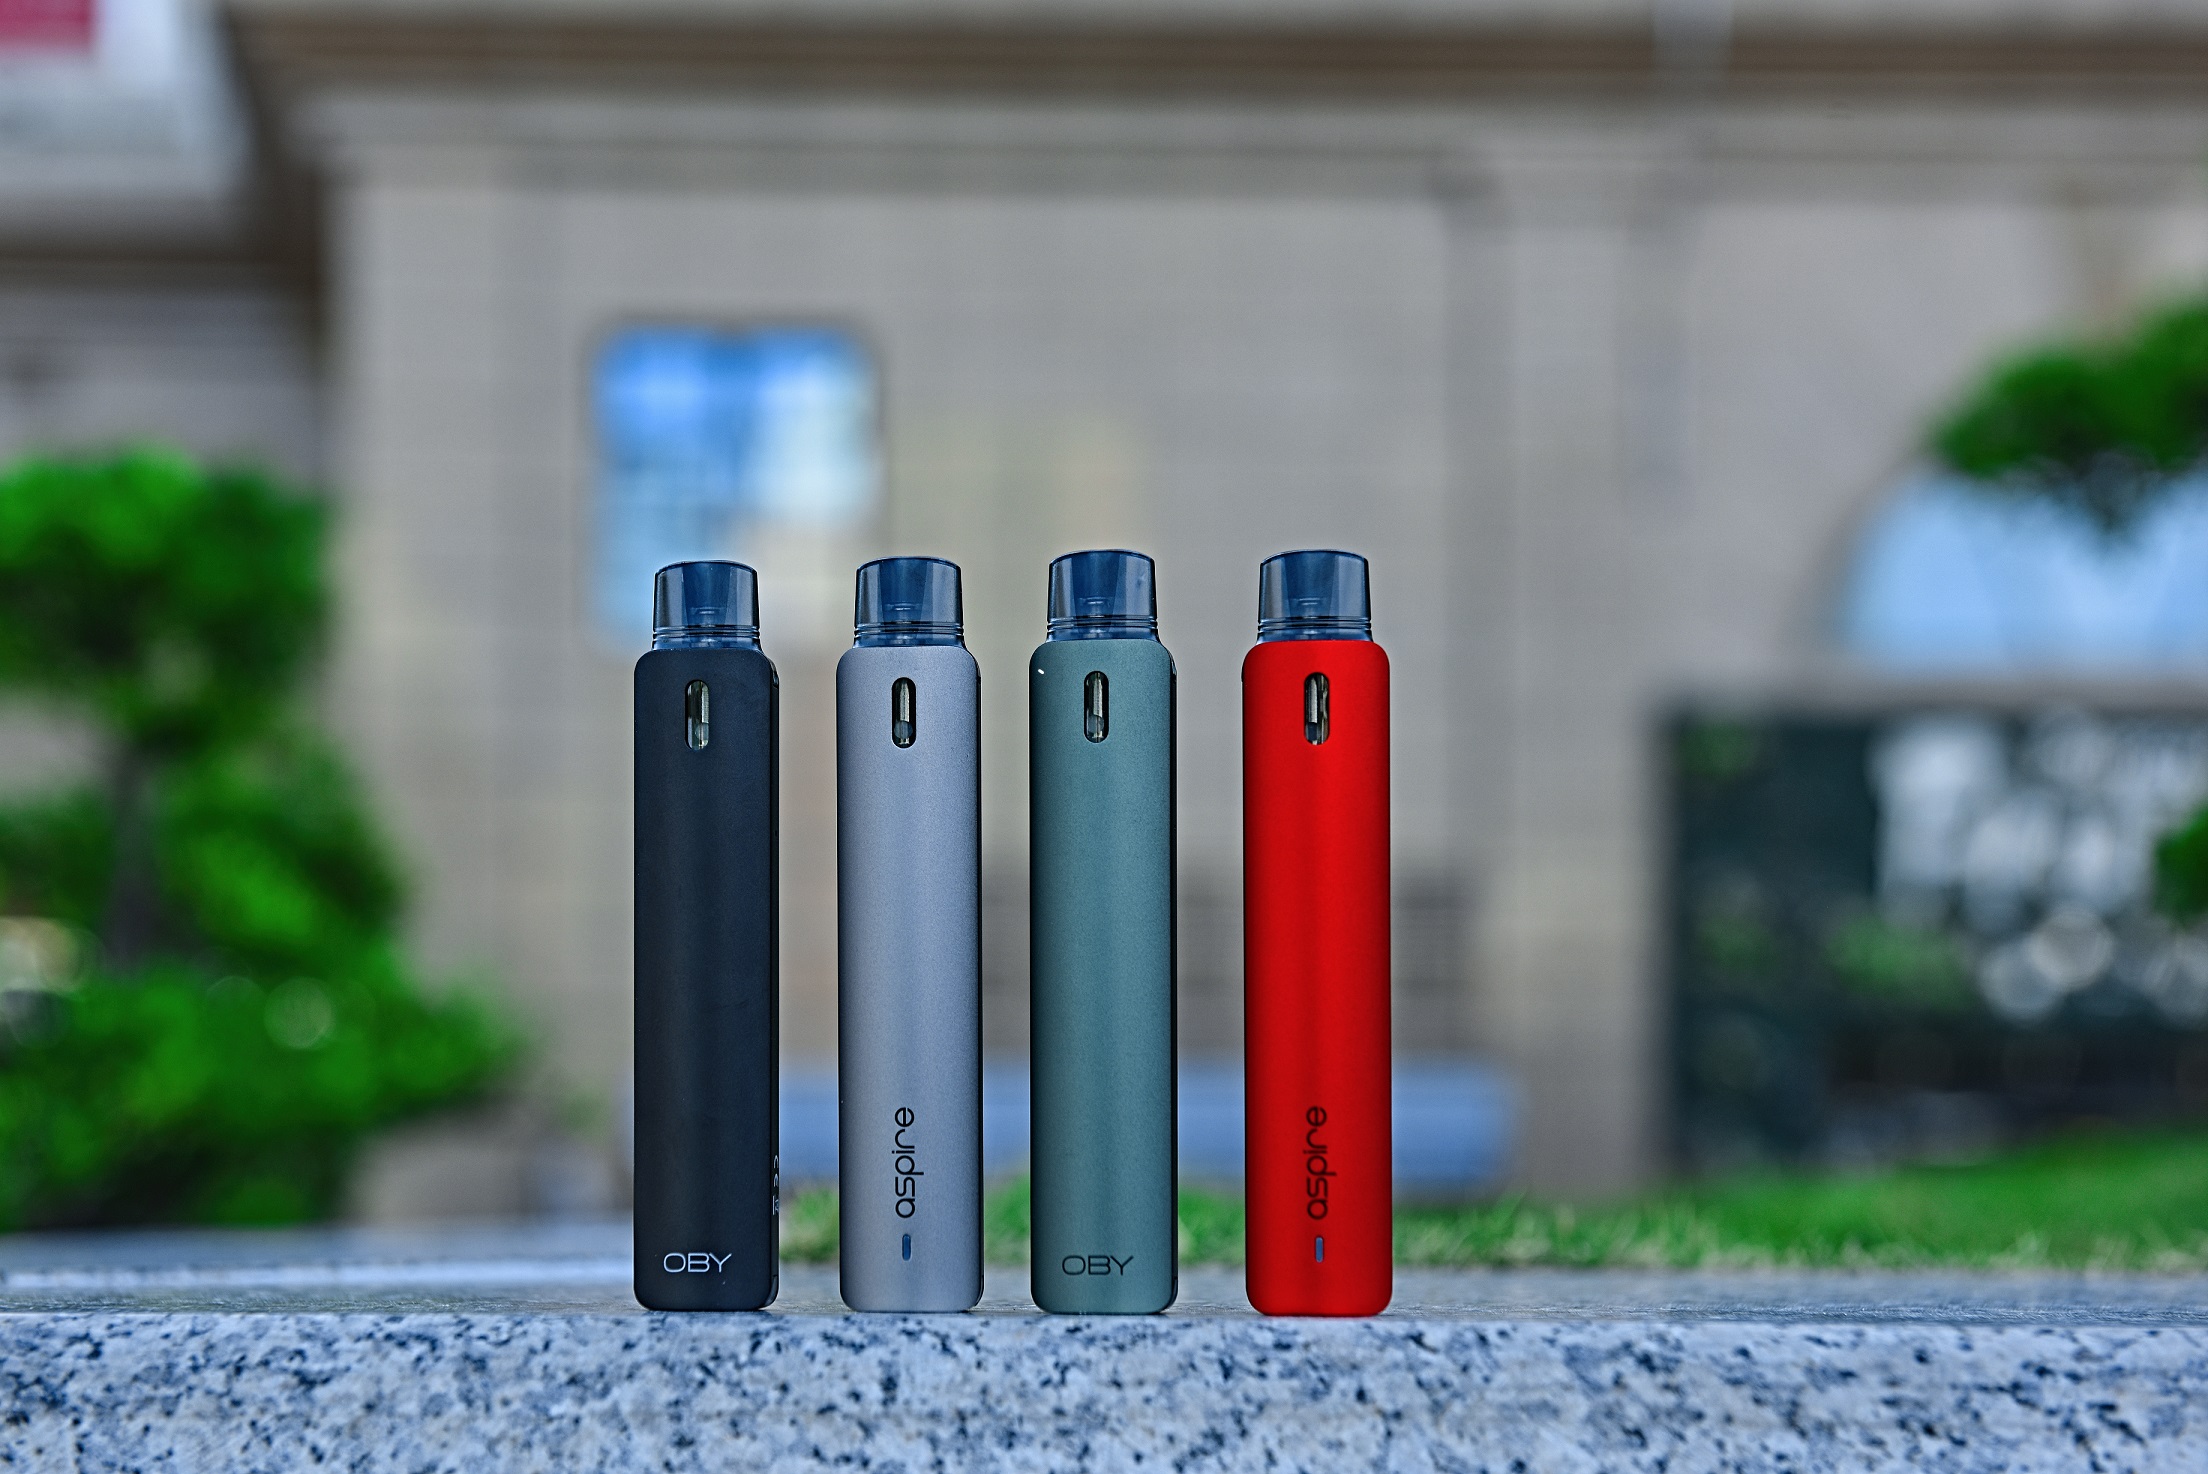 Aspire OBY in four colors: jet black, space gray, hunter green and garnet red.